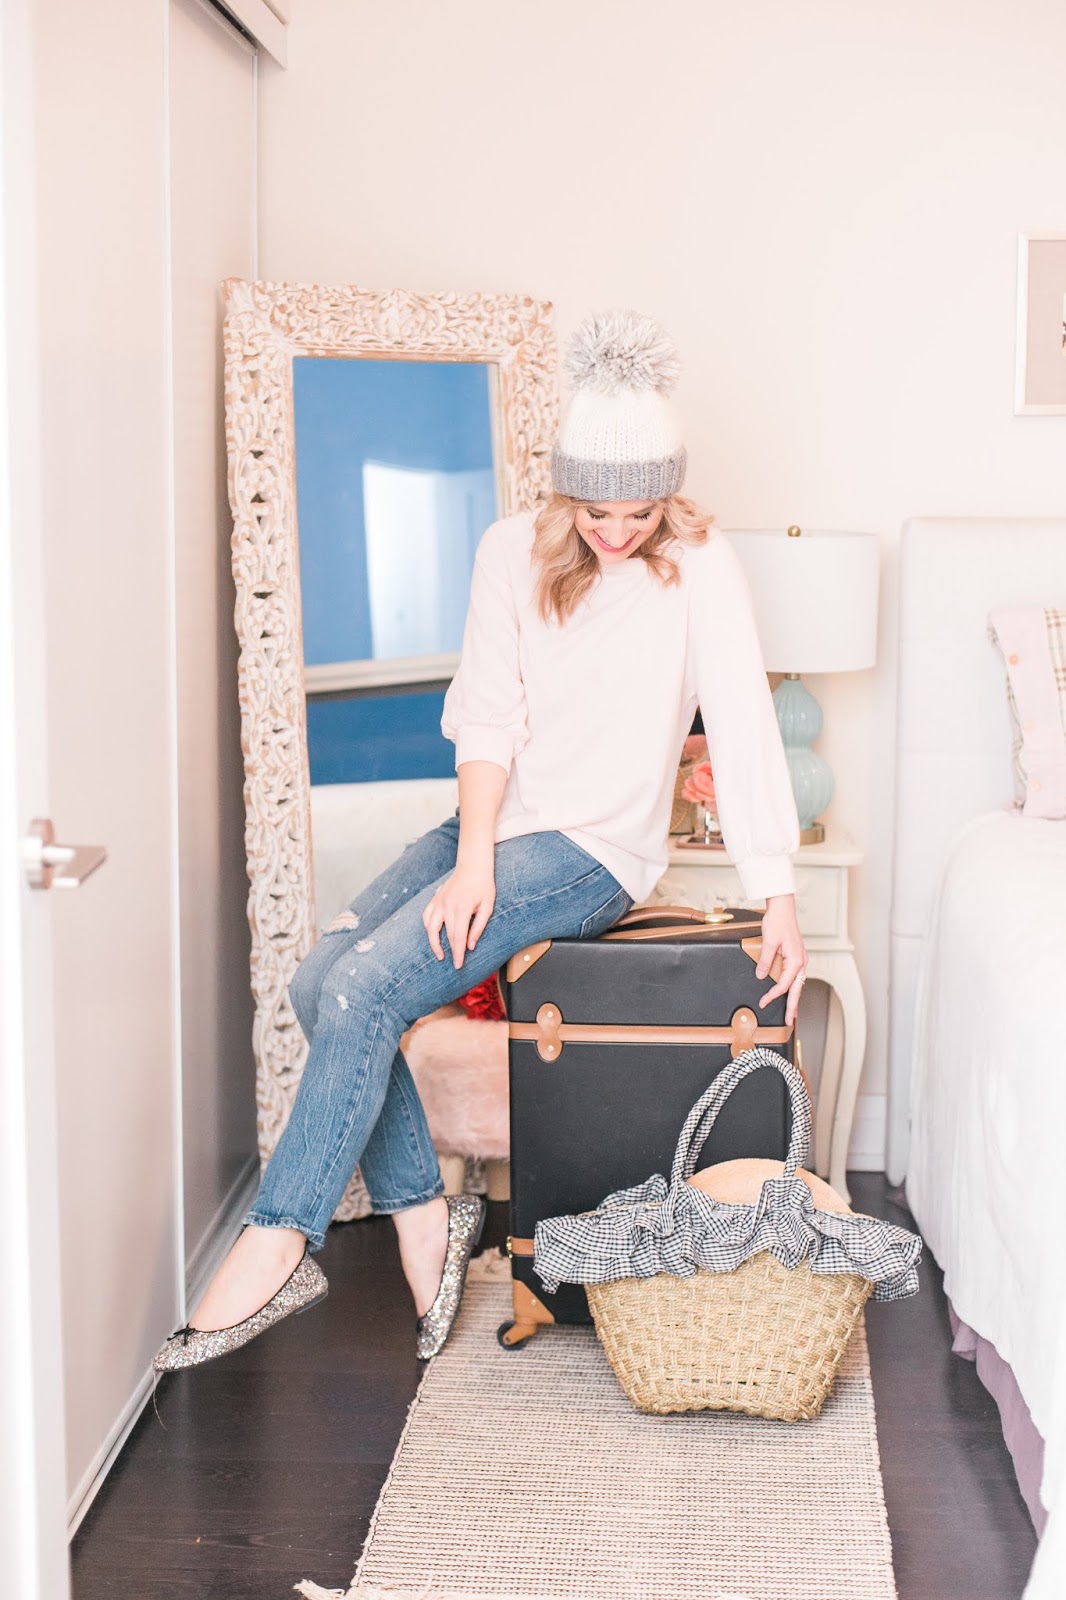 Bijuleni - Traveling Light: 5 Rules to Help You Pack Less